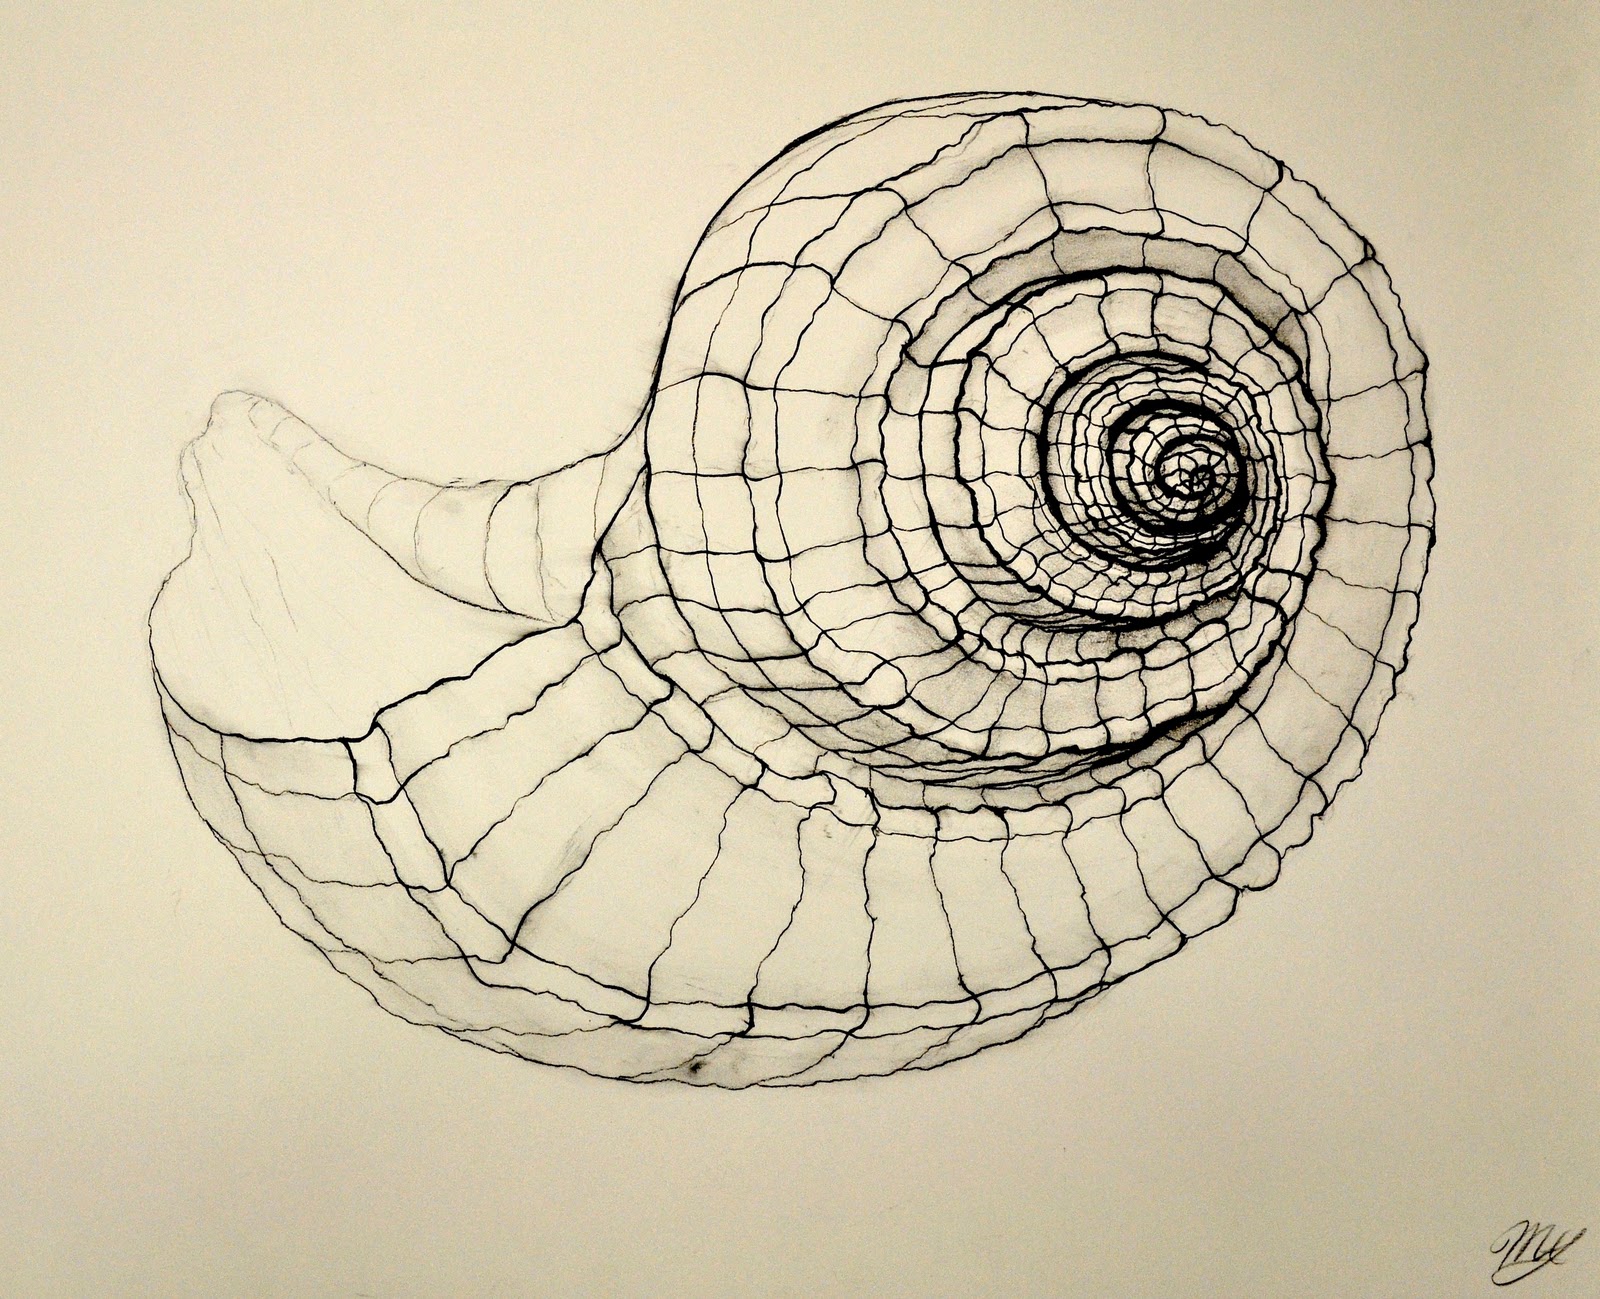  Draw Spiral In Sketch with Pencil